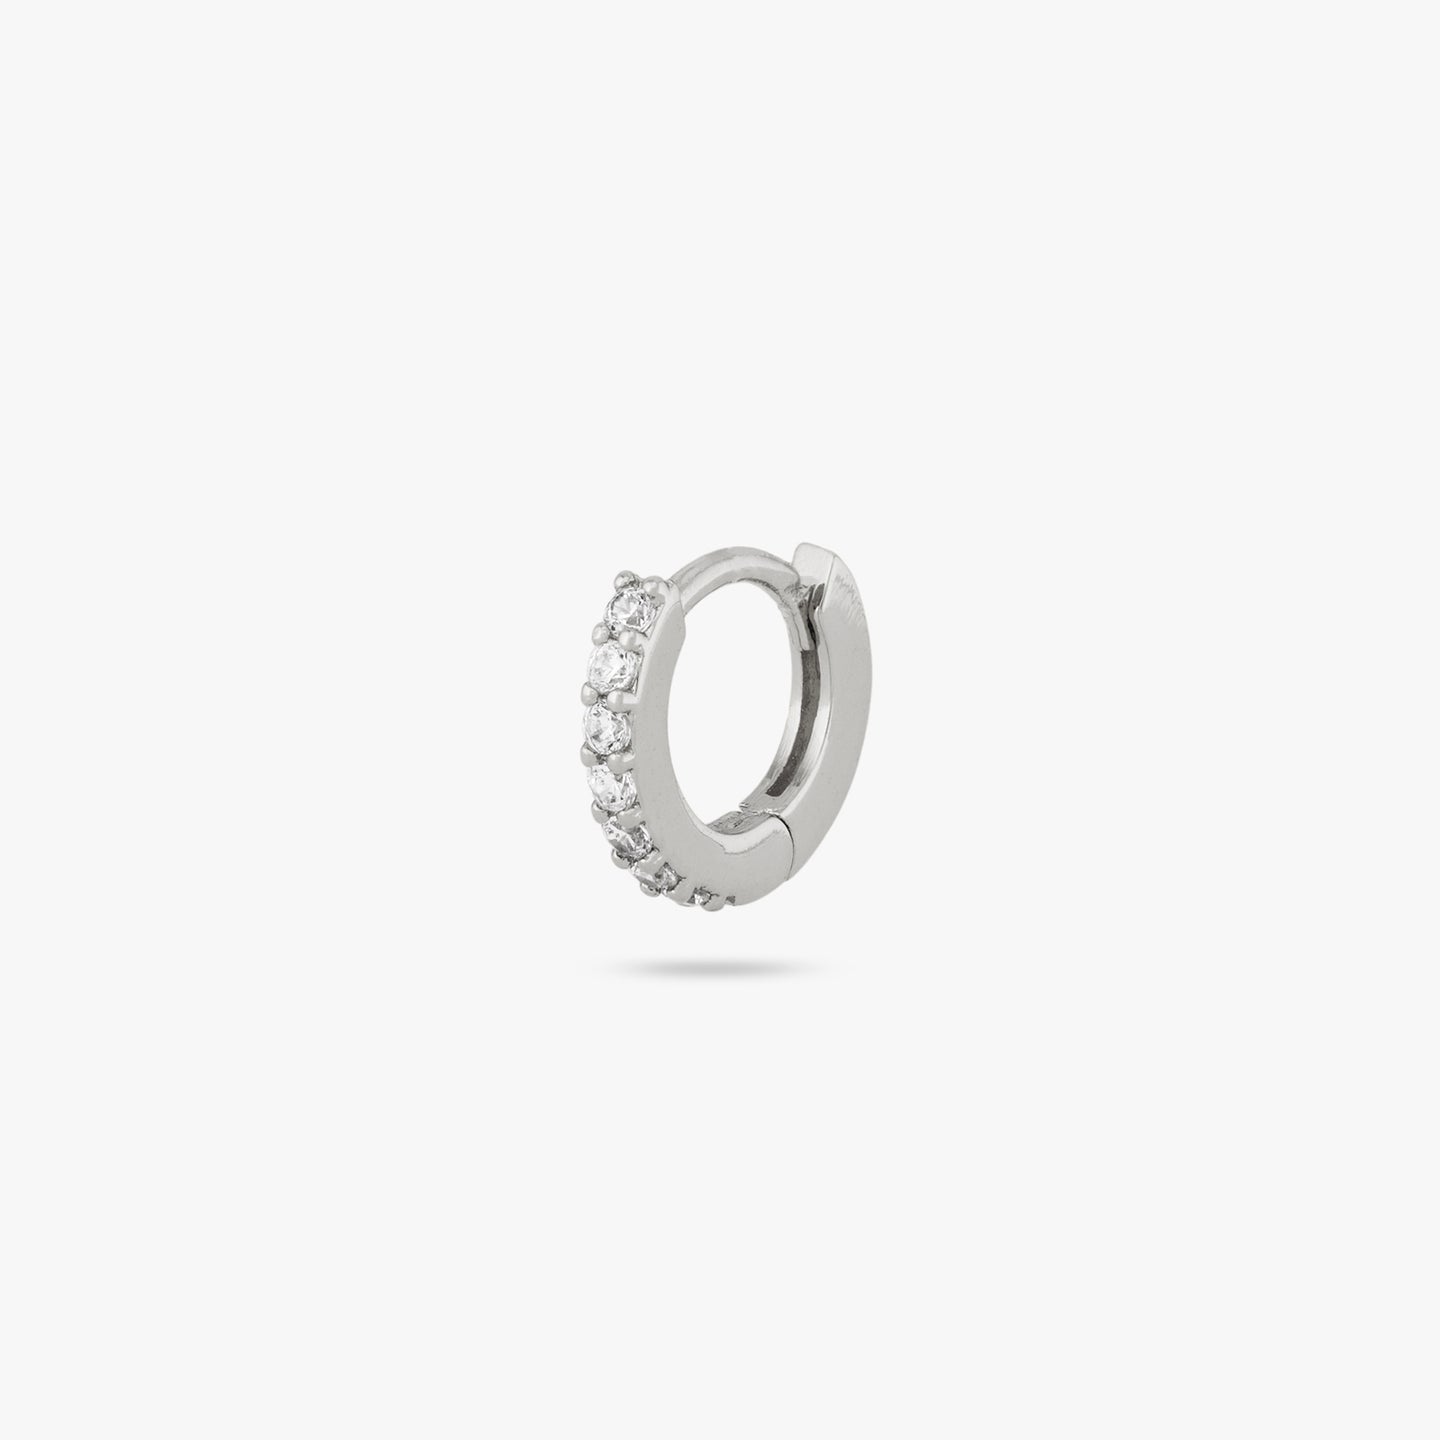 A silver/clear micro pave huggie with a 6mm inner diameter color:null|silver/clear